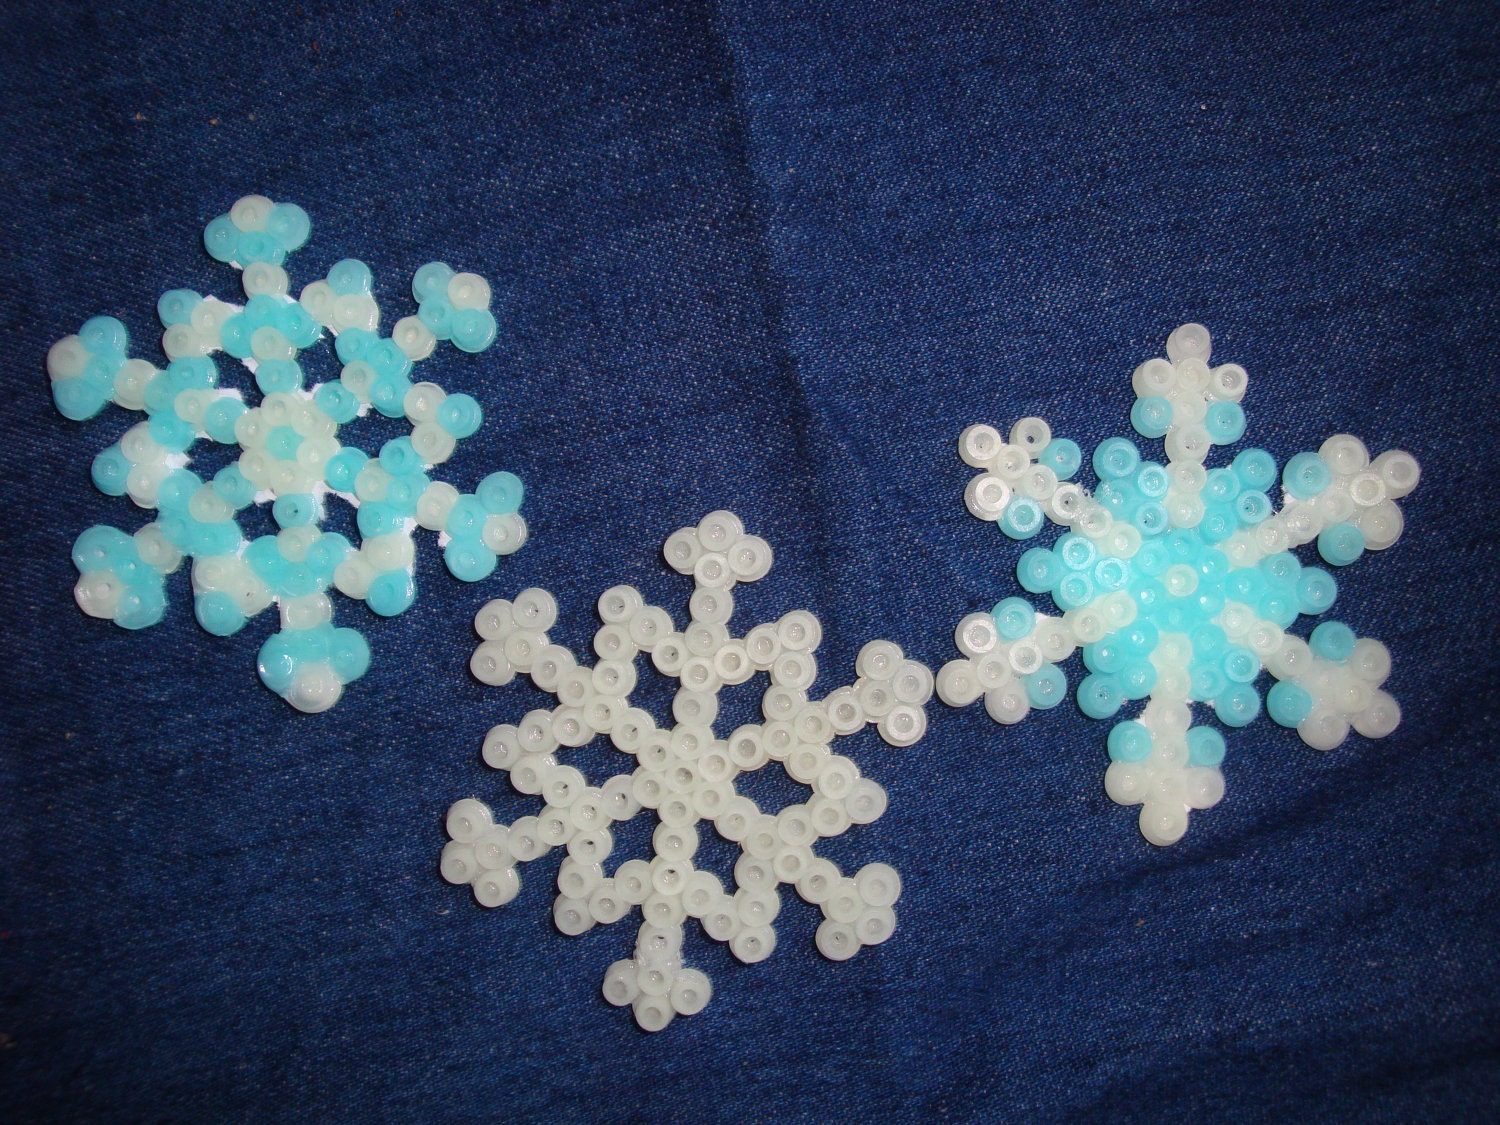 Snowflake magnets glow in the dark set of three